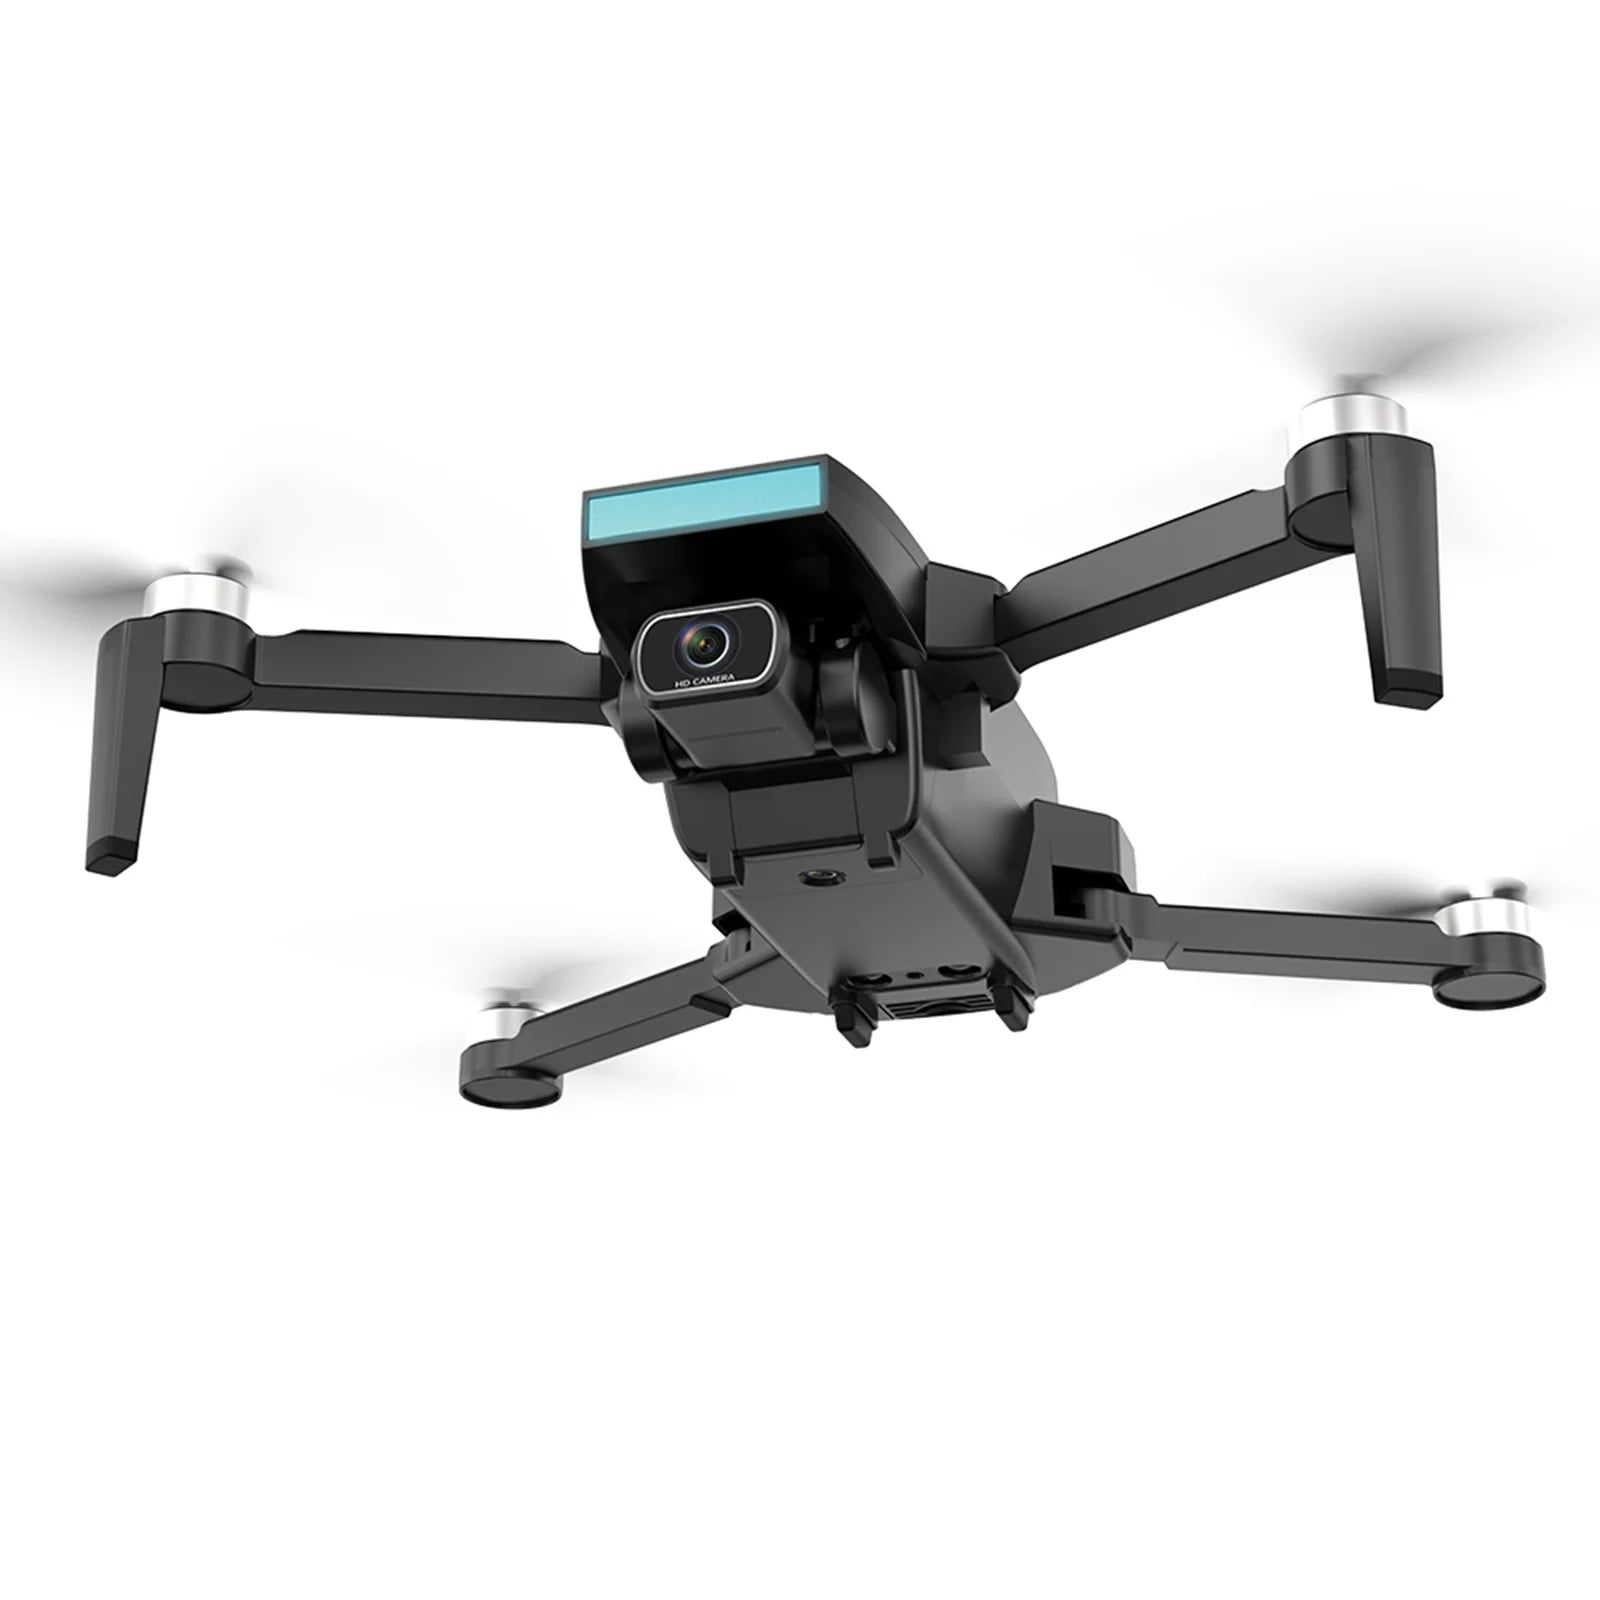 ZLL SG107 Pro Drone, the BRIGHT 2" is equipped with an intelligent processing chip, with powerful processing performance .